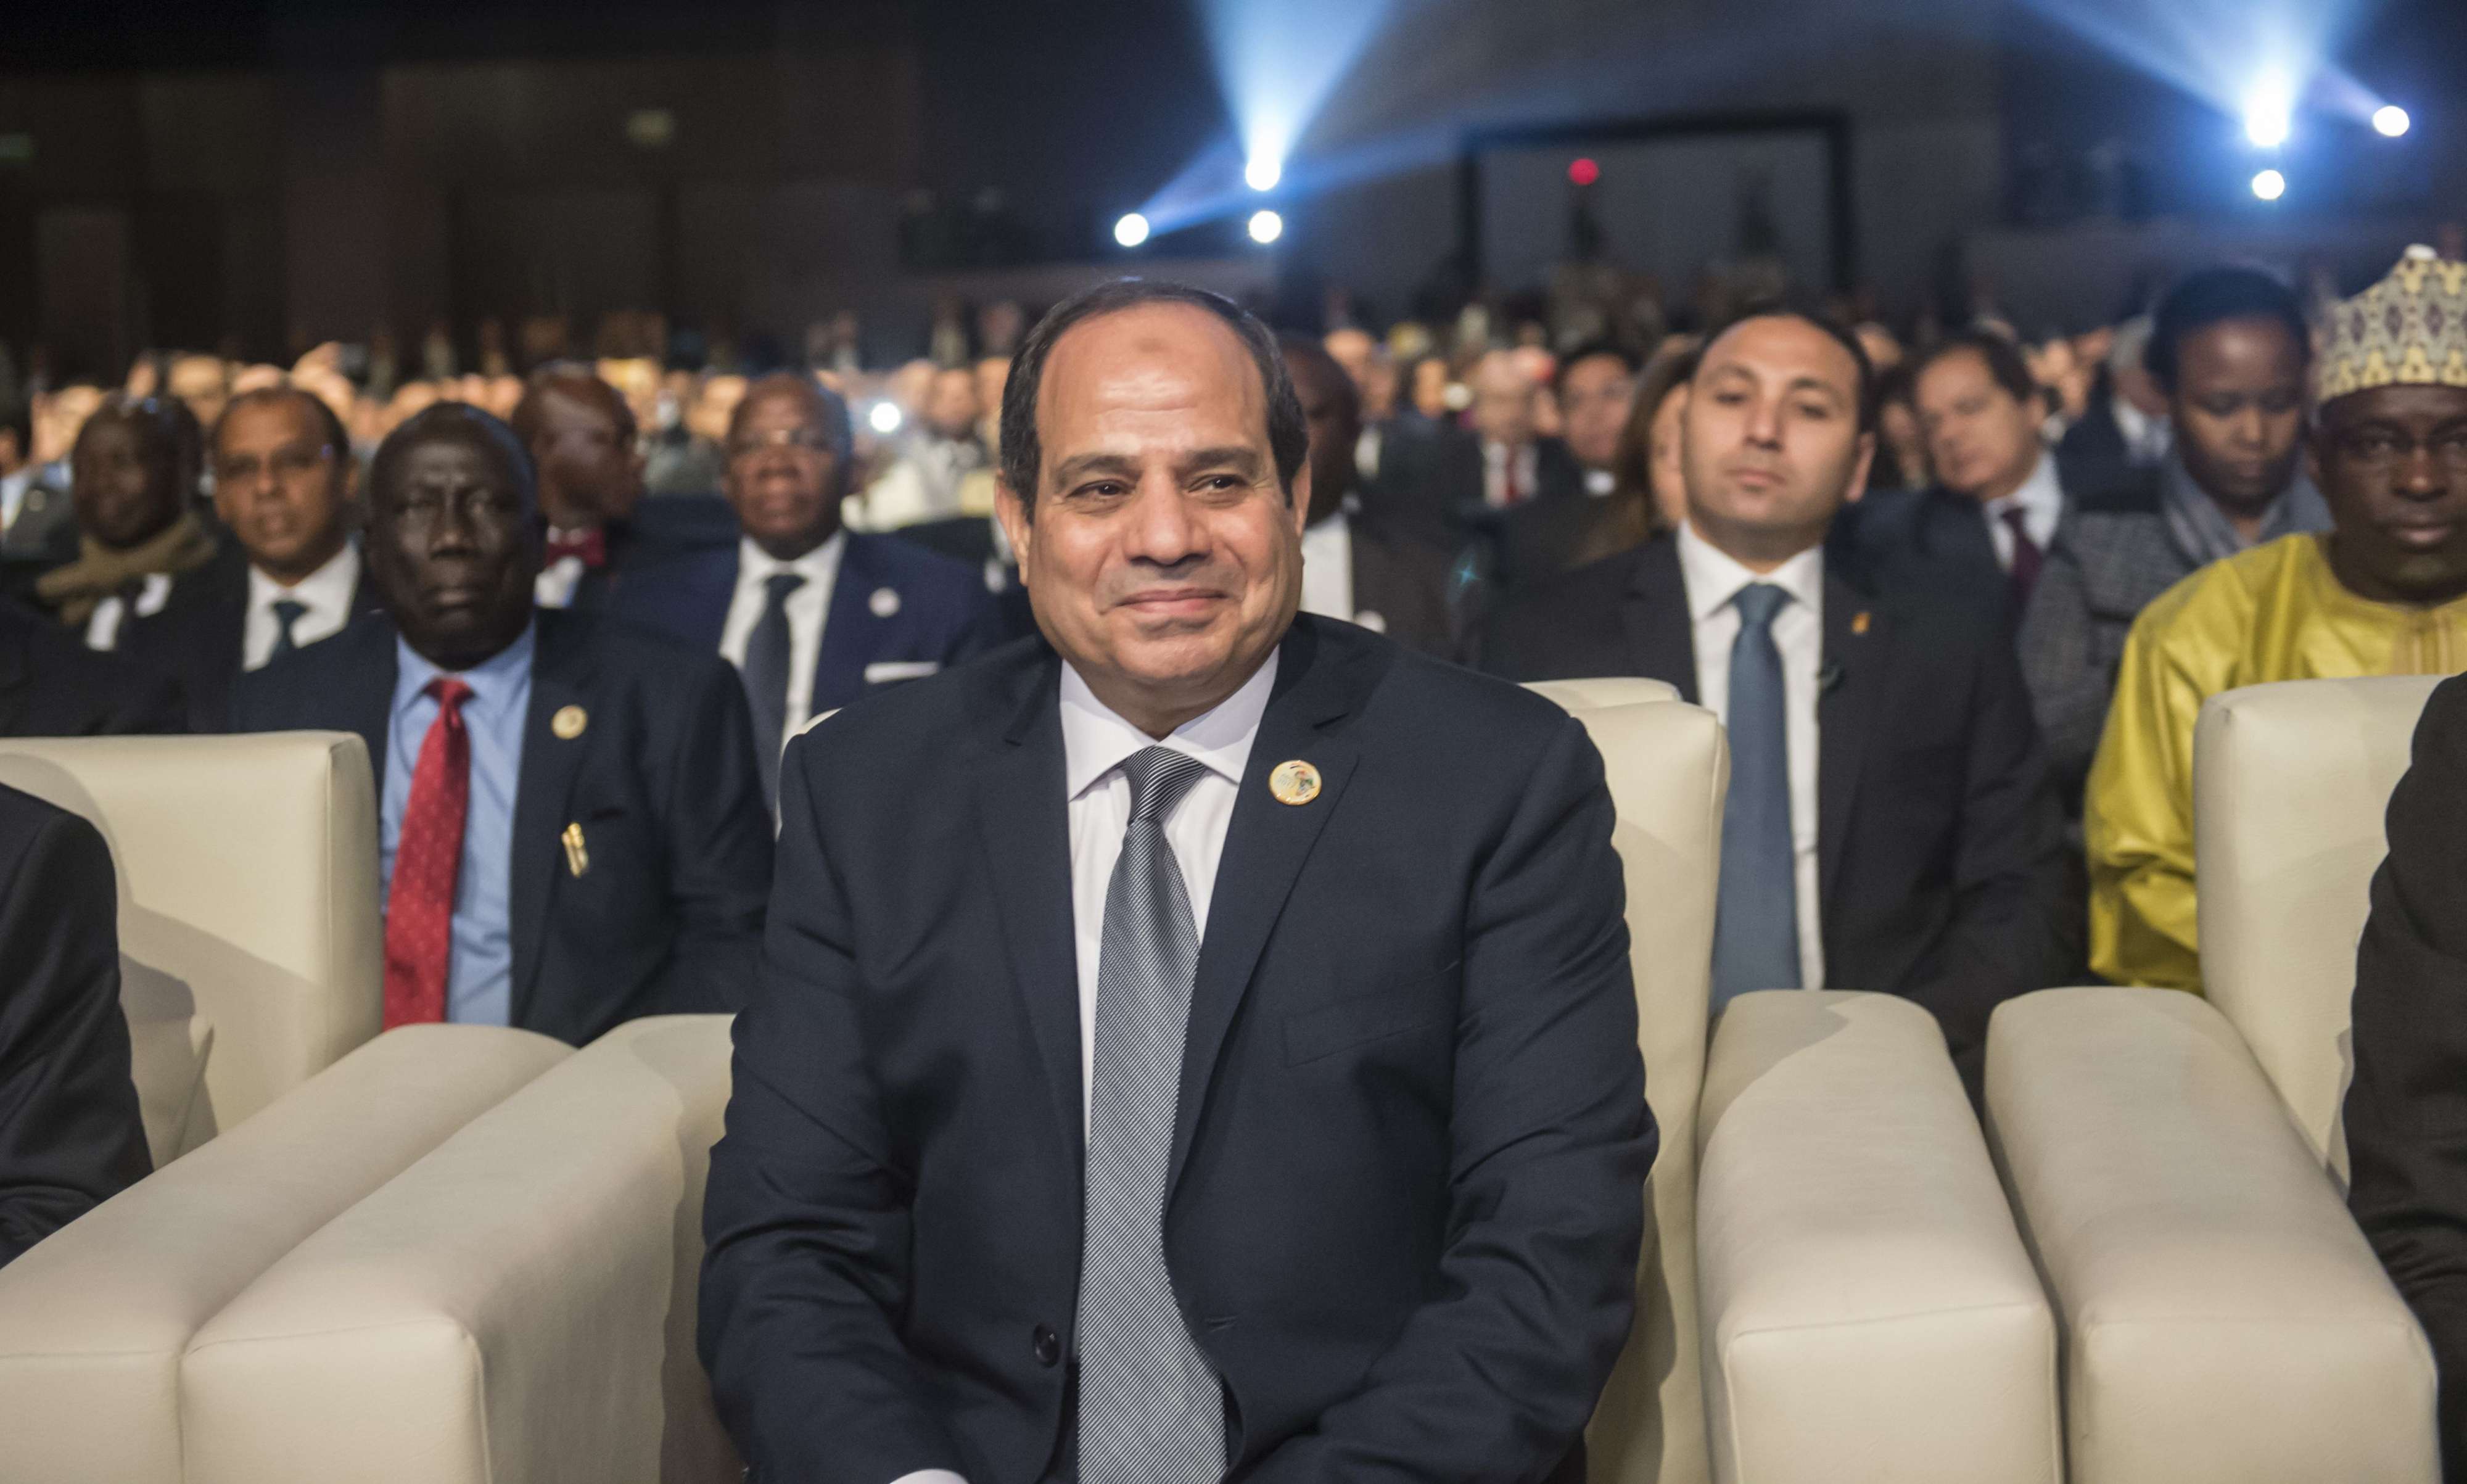 Egyptian President Abdel Fattah al-Sisi attends the opening session of the Africa 2017 Forum in the Red Sea resort of Sharm el-Sheikh on December 8, 2017.